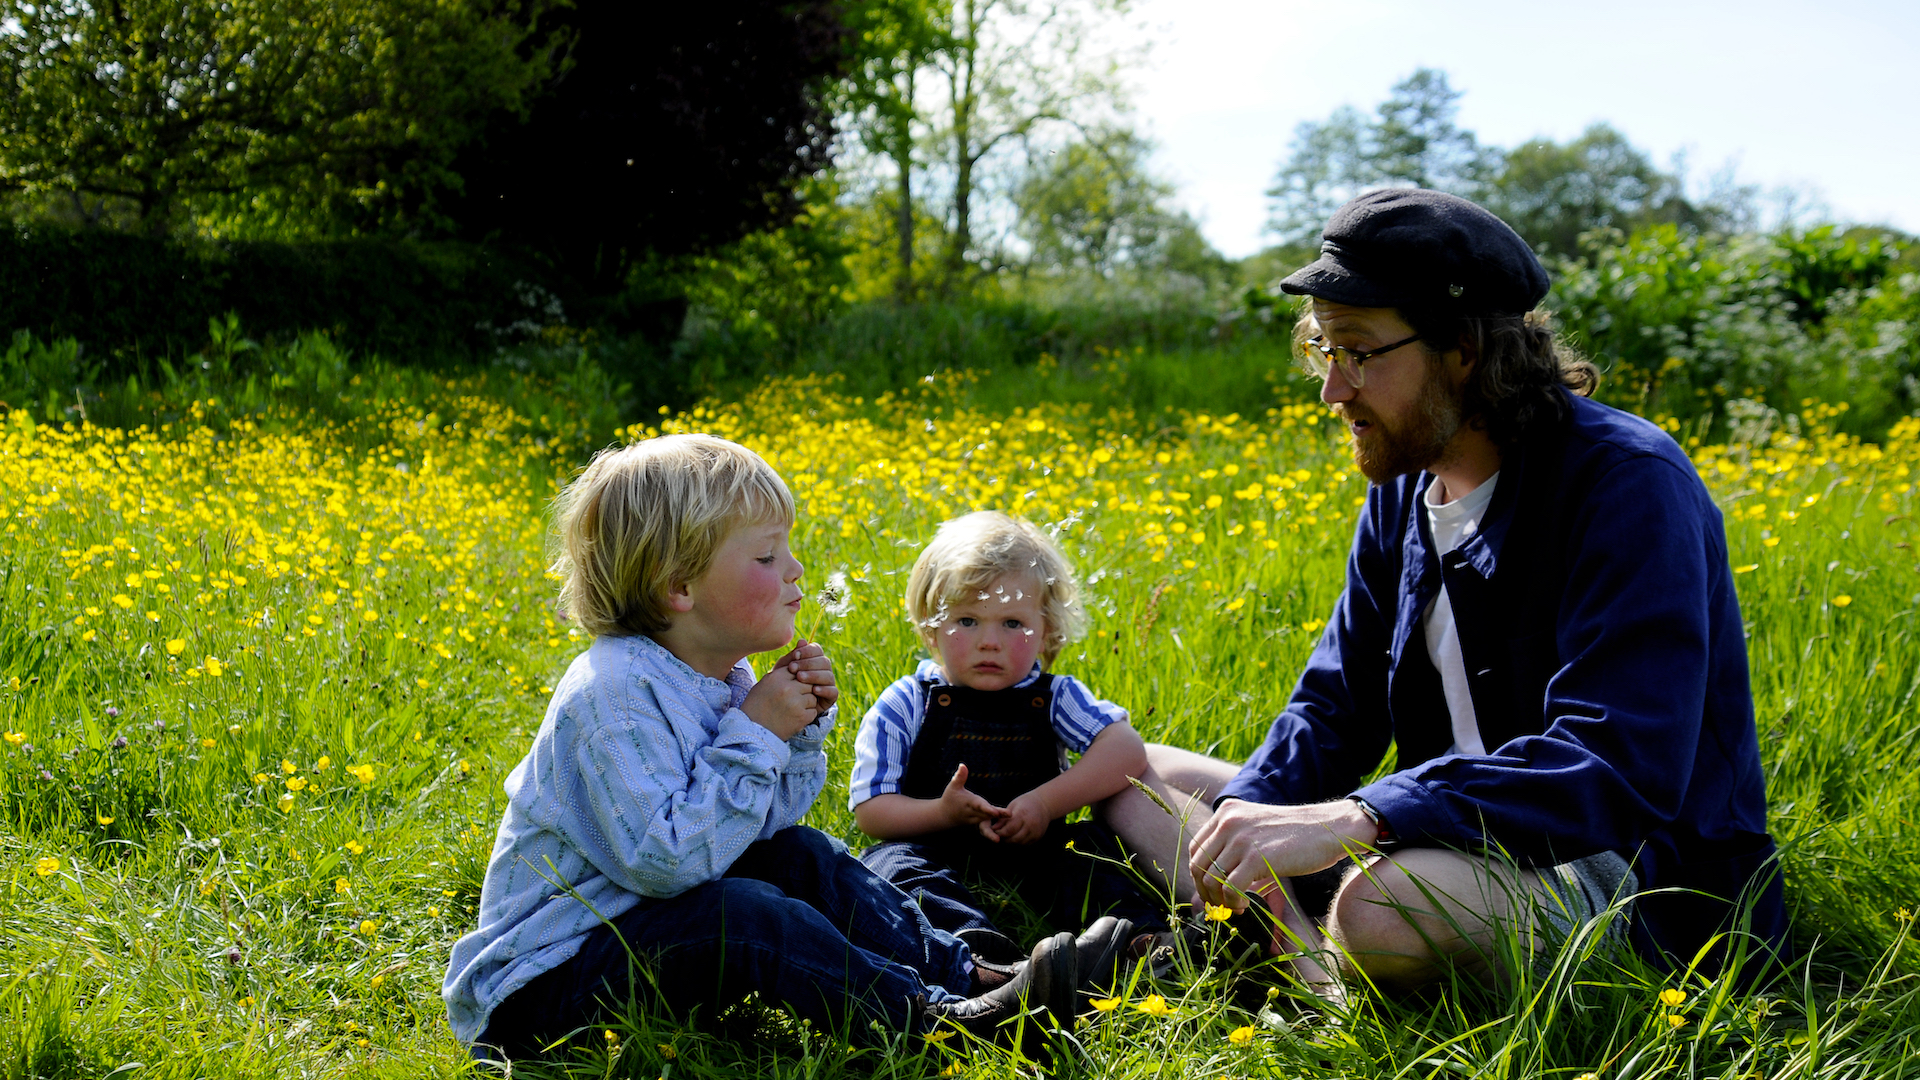 Two red faced children and a man sit in a meadow in summer surrounded by long grass and wildflowers